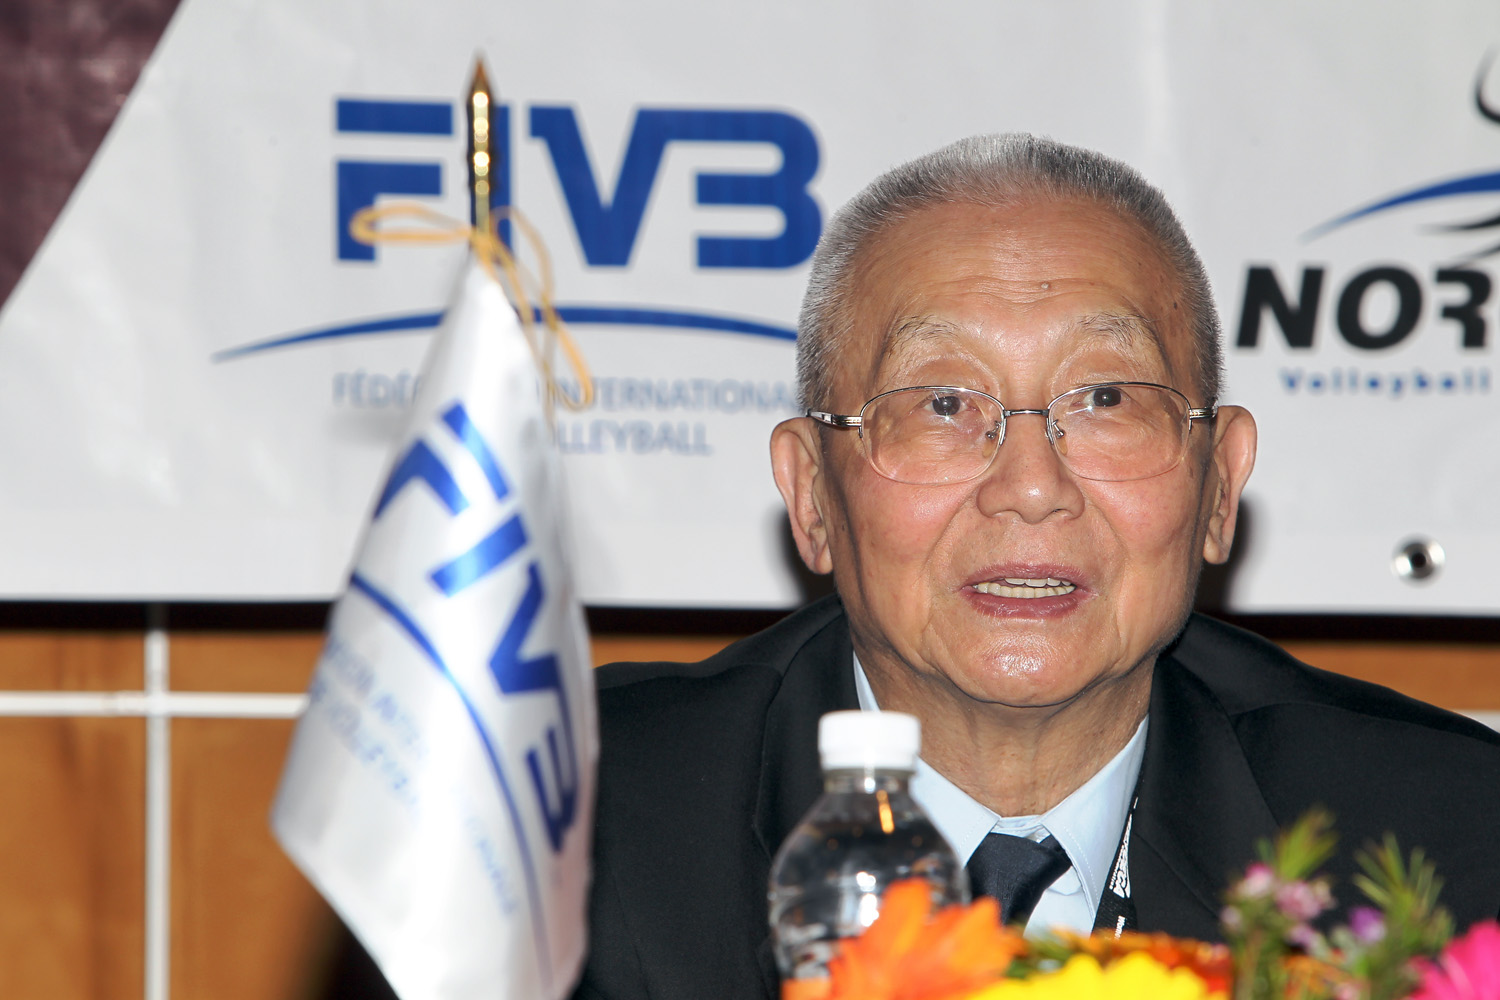 Jizhong Wei is a former President of the FIVB and secretary general of the Chinese Olympic Committee ©Getty Images